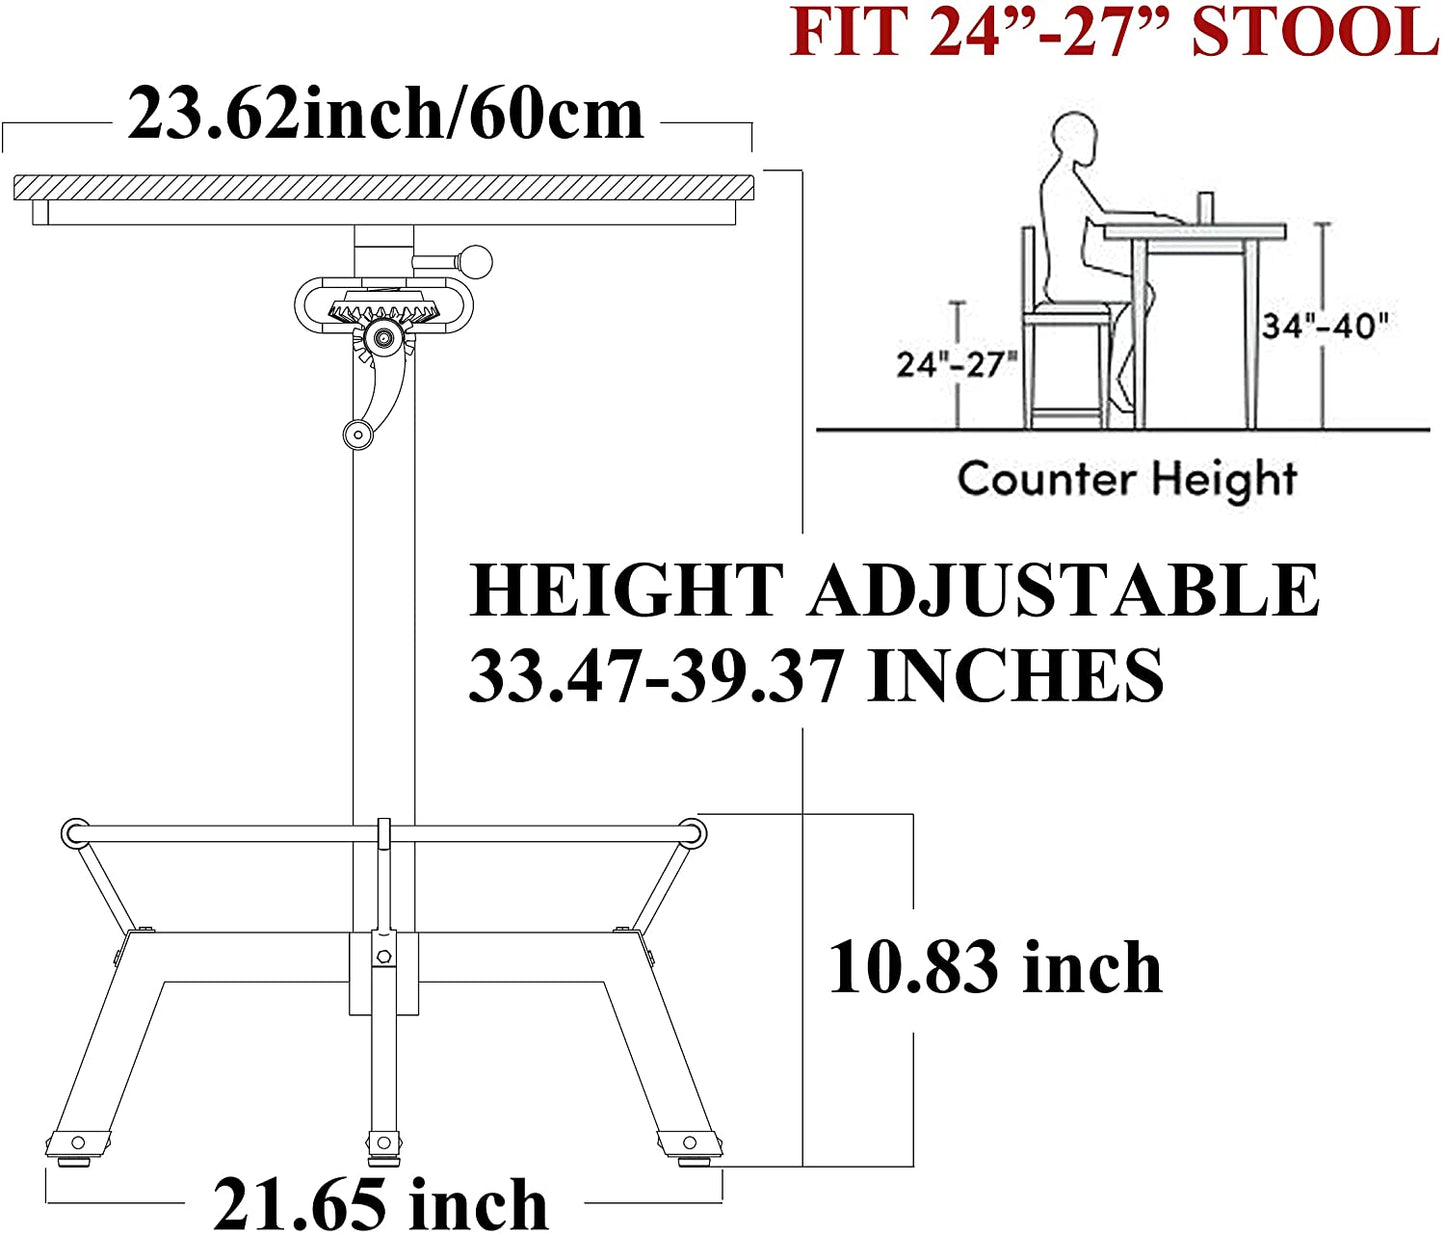 Crank Handle Bar Table (33.5-39.4 Inch Tall) and Counter Bar Stool (24-30 Inch) Bundle, Industrial Swivel Adjustable